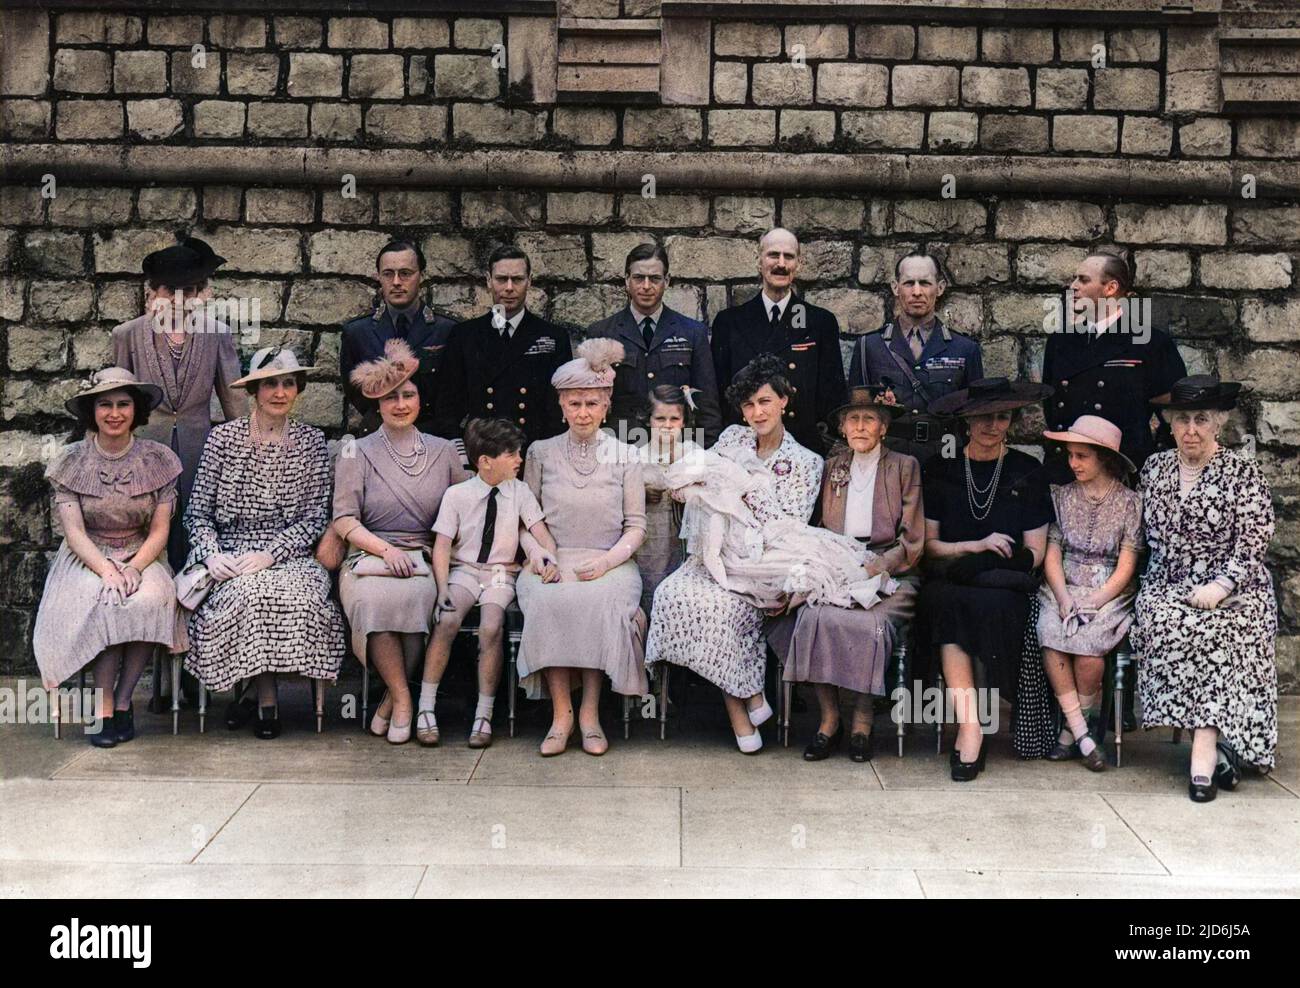 Christening of Prince Michael George Charles Franklin, third child of Prince George, Duke of Kent, and Princess Marina, Duchess of Kent.  He was born on 4 July 1942 and his father was killed in a flying accident while on duty when he was just seven weeks old.  Back row from left: Princess Marie Louise, Prince Bernhard of the Netherlands, King George VI, Duke of Kent, King Haakon of Norway, King George of the Hellenes, Crown Prince Olaf of Norway.  Seated from left, Princess Elizabeth (Queen Elizabeth II), Lady Patricia Ramsey (formerly Princess Patricia of Connaught), Queen Elizabeth, the Quee Stock Photo